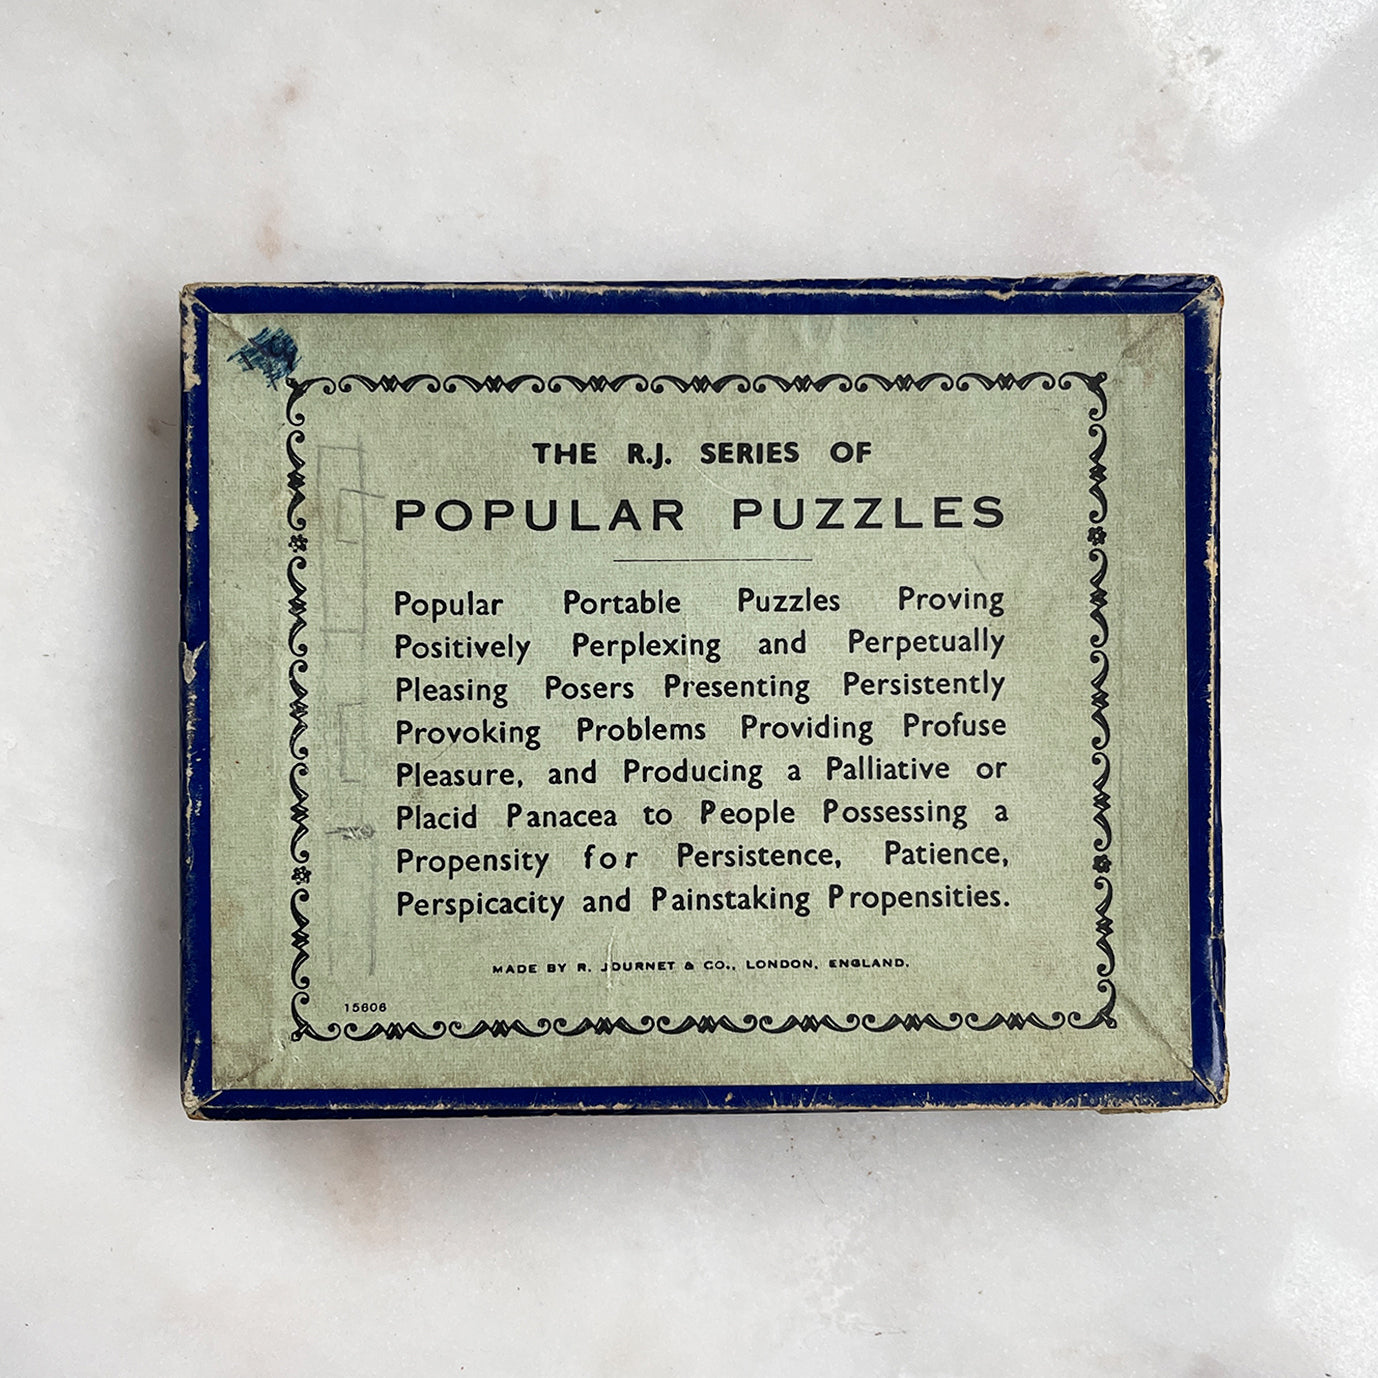 A Vintage TV Puzzle by R.Journet & Co. Shake the pieces of screen in to position on the screen of the TV. Hours of fun!  - SHOP NOW - www.intovintage.co.uk